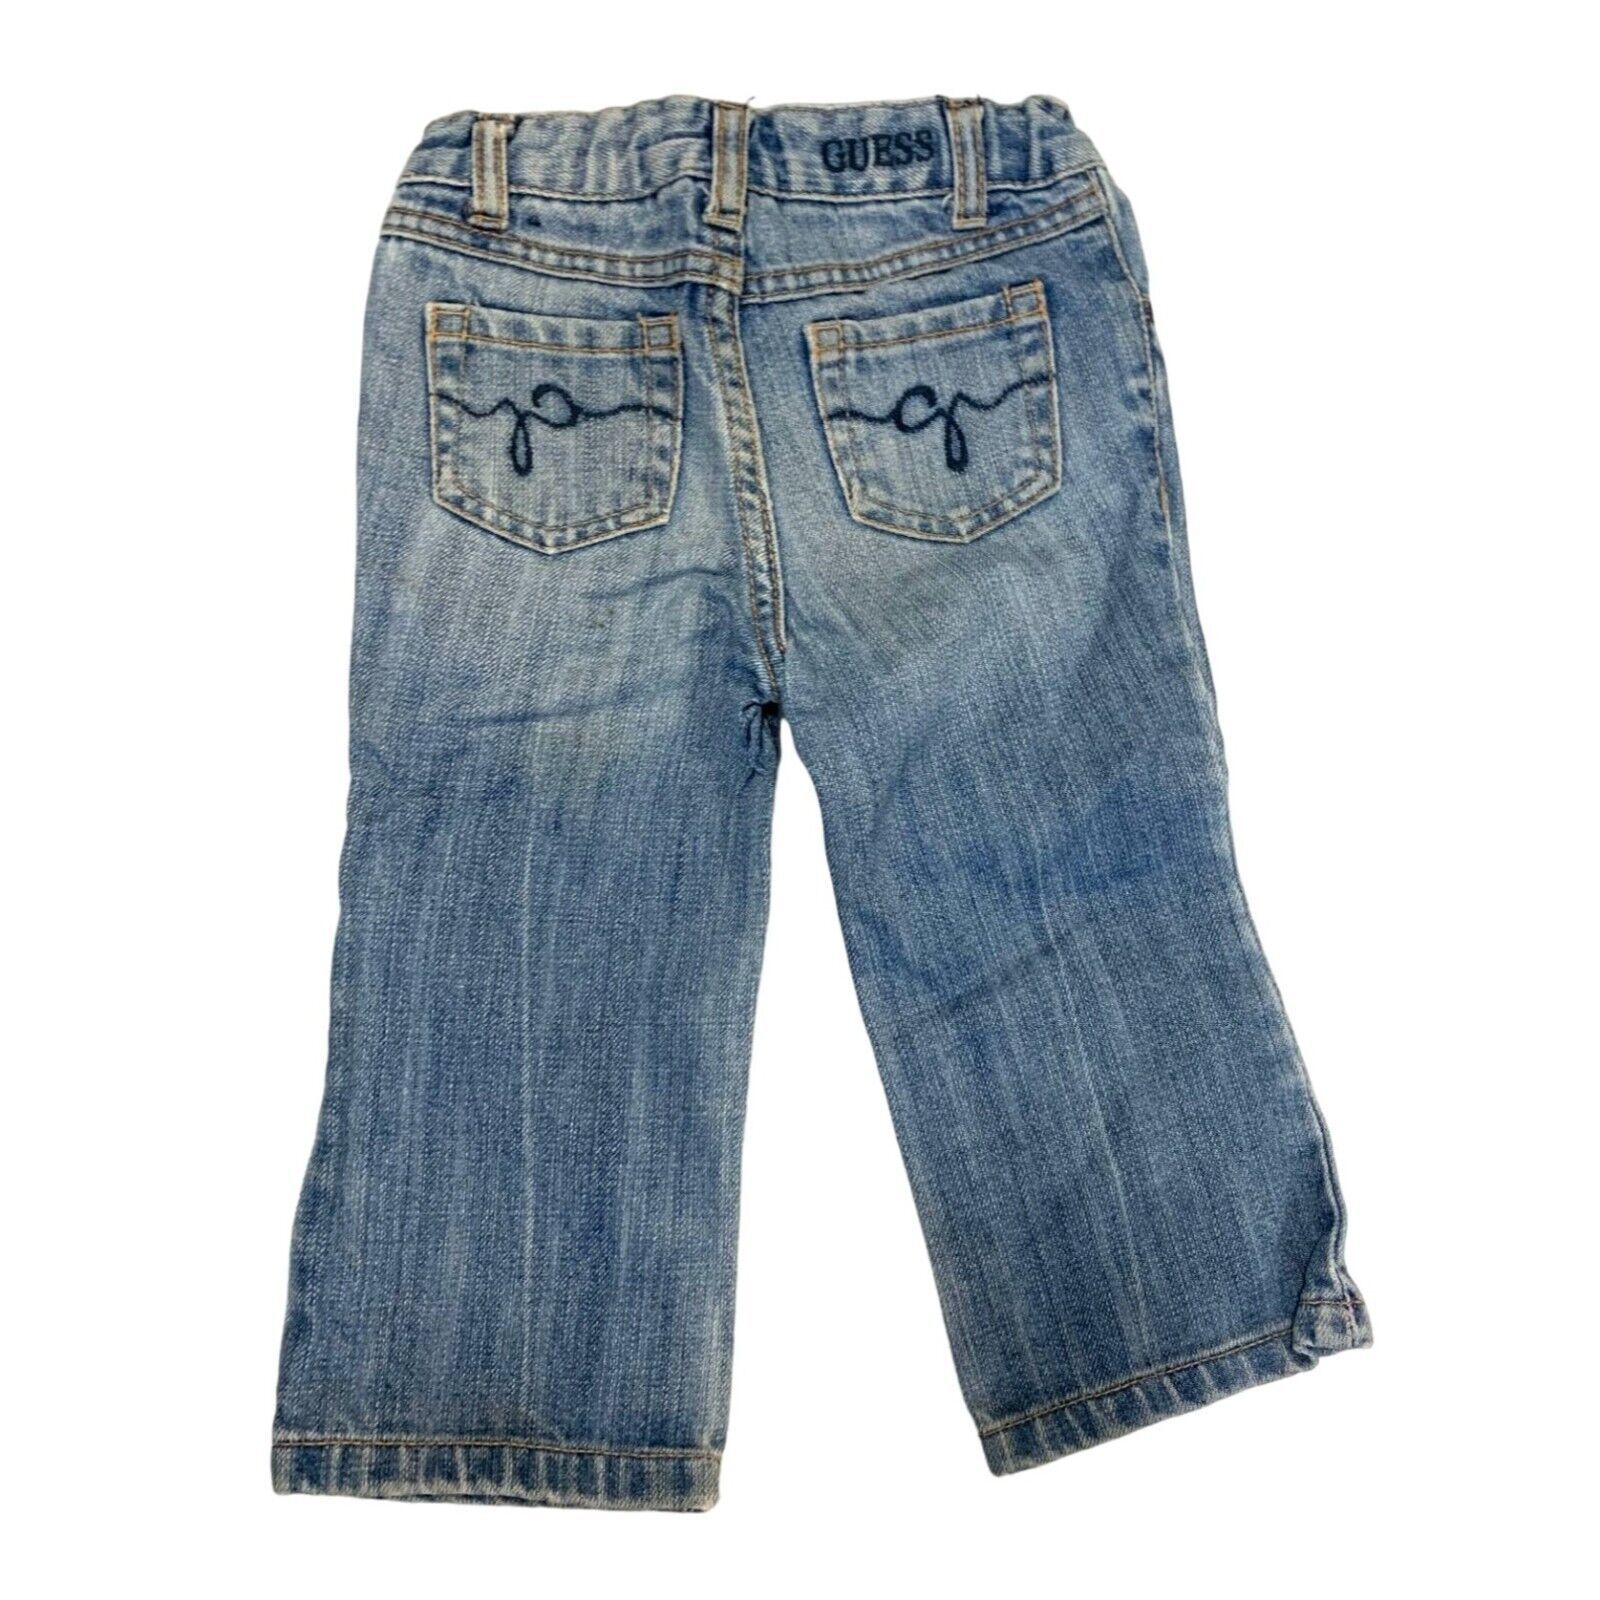 Primary image for Guess Boys Infant Baby 18 Months Adjustable Waist Jeans Light Wash